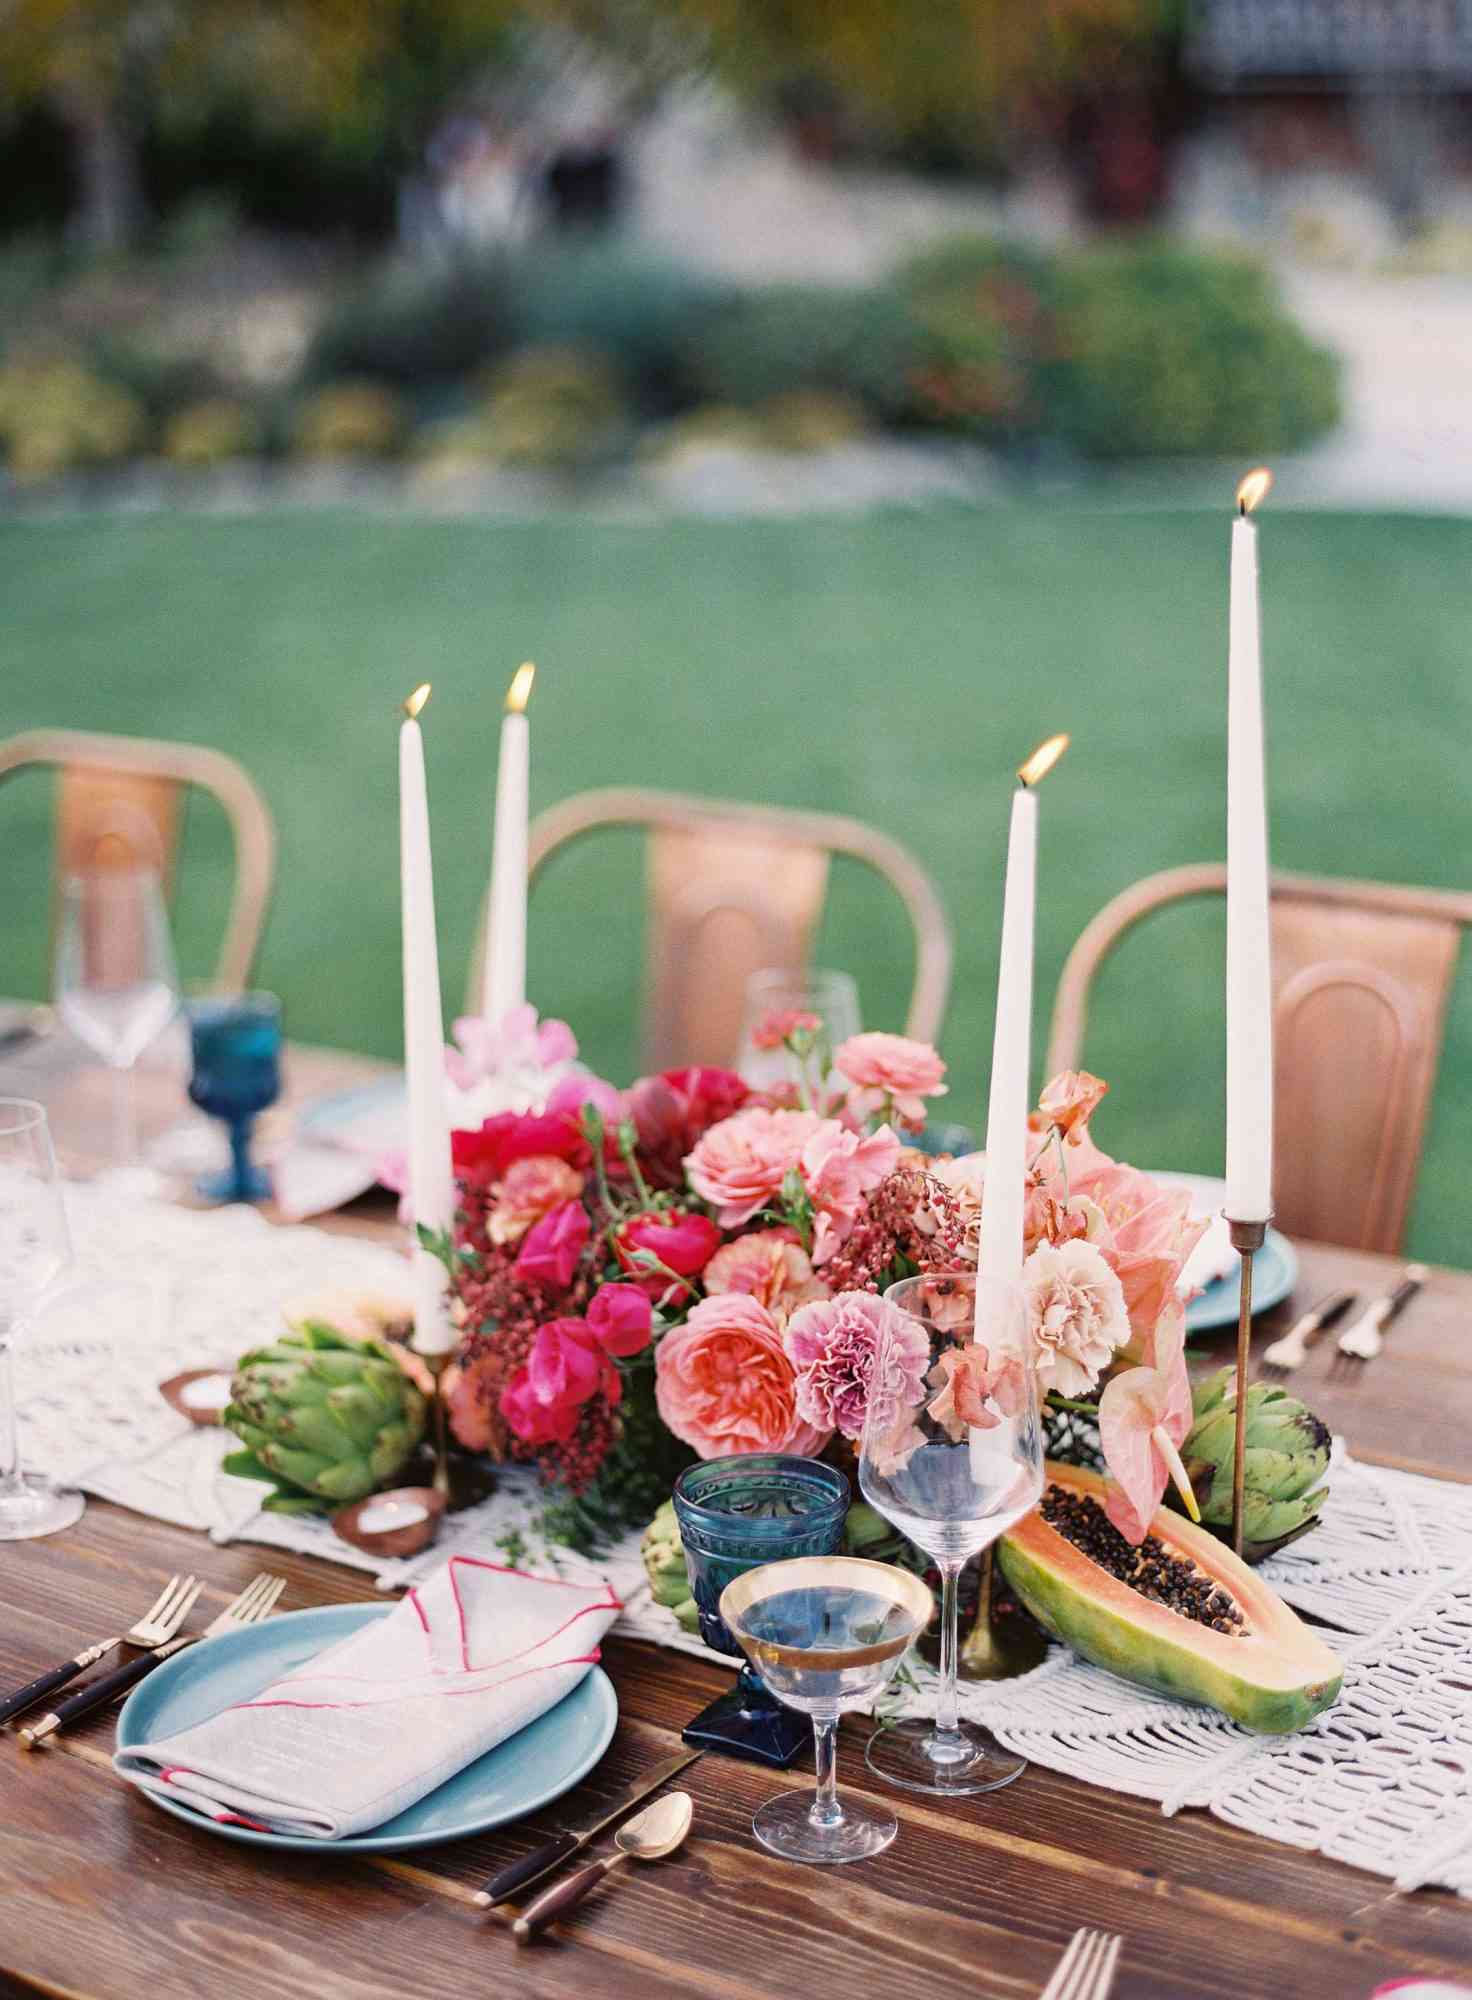 pink and red centerpiece